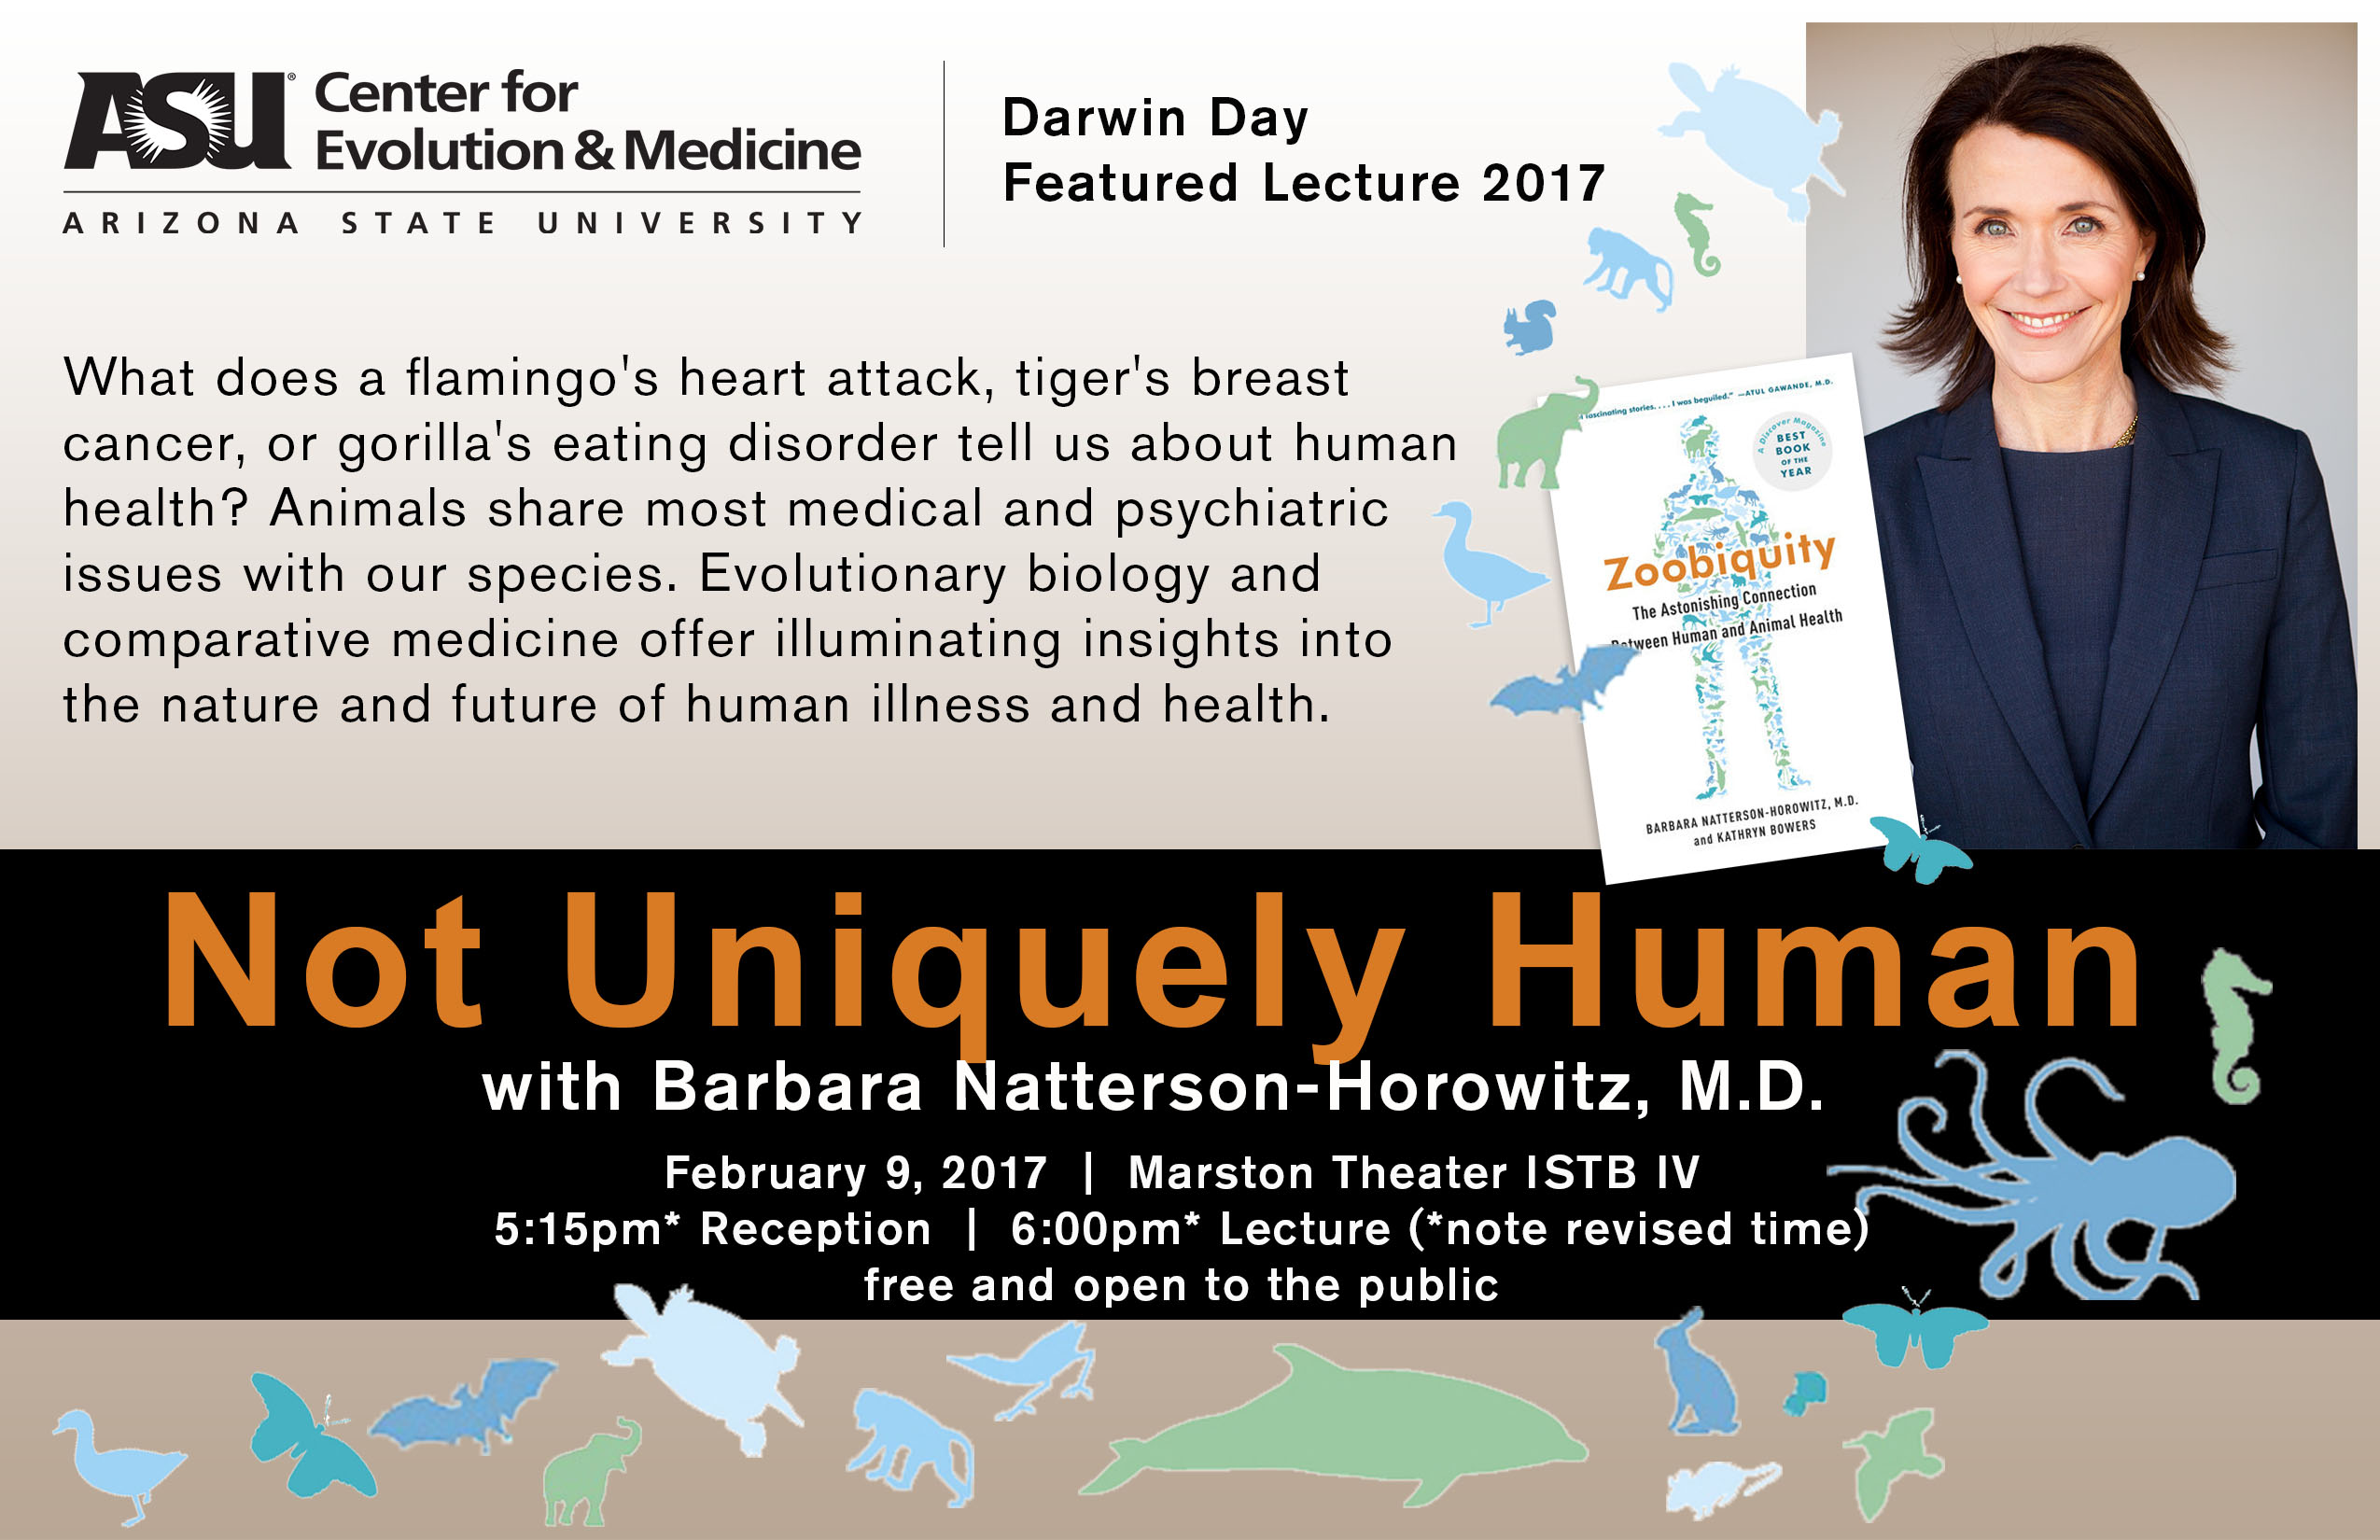 "Not Uniquely Human" Darwin Day Lecture featuring Barbara Natterson-Horowitz, M.D.